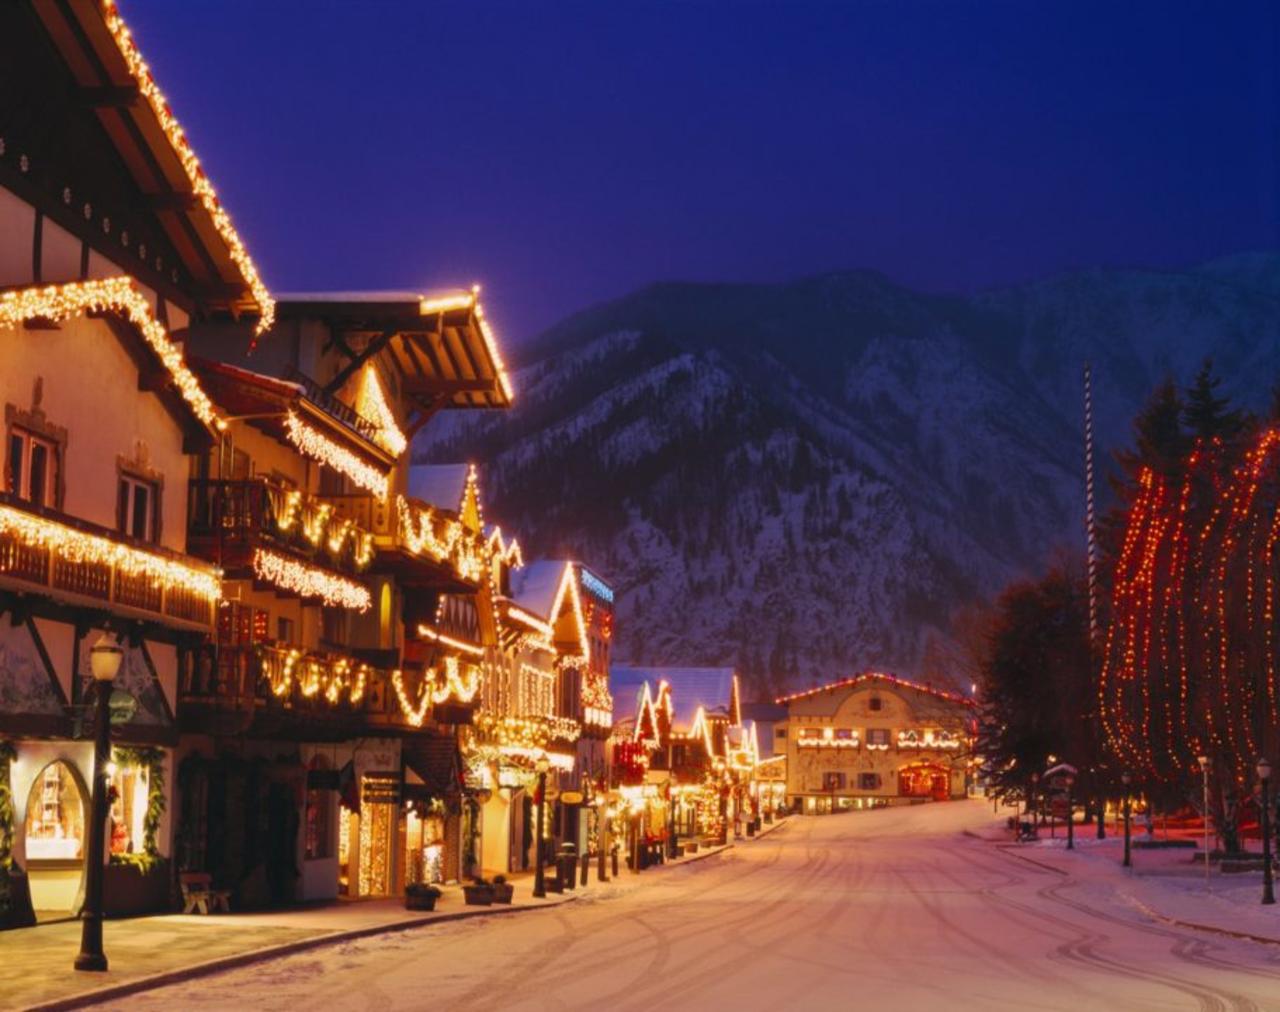 Leavenworth, Washington, Is the Most Festive U.S. Town to Visit at Christmas, A New Survey Reveals